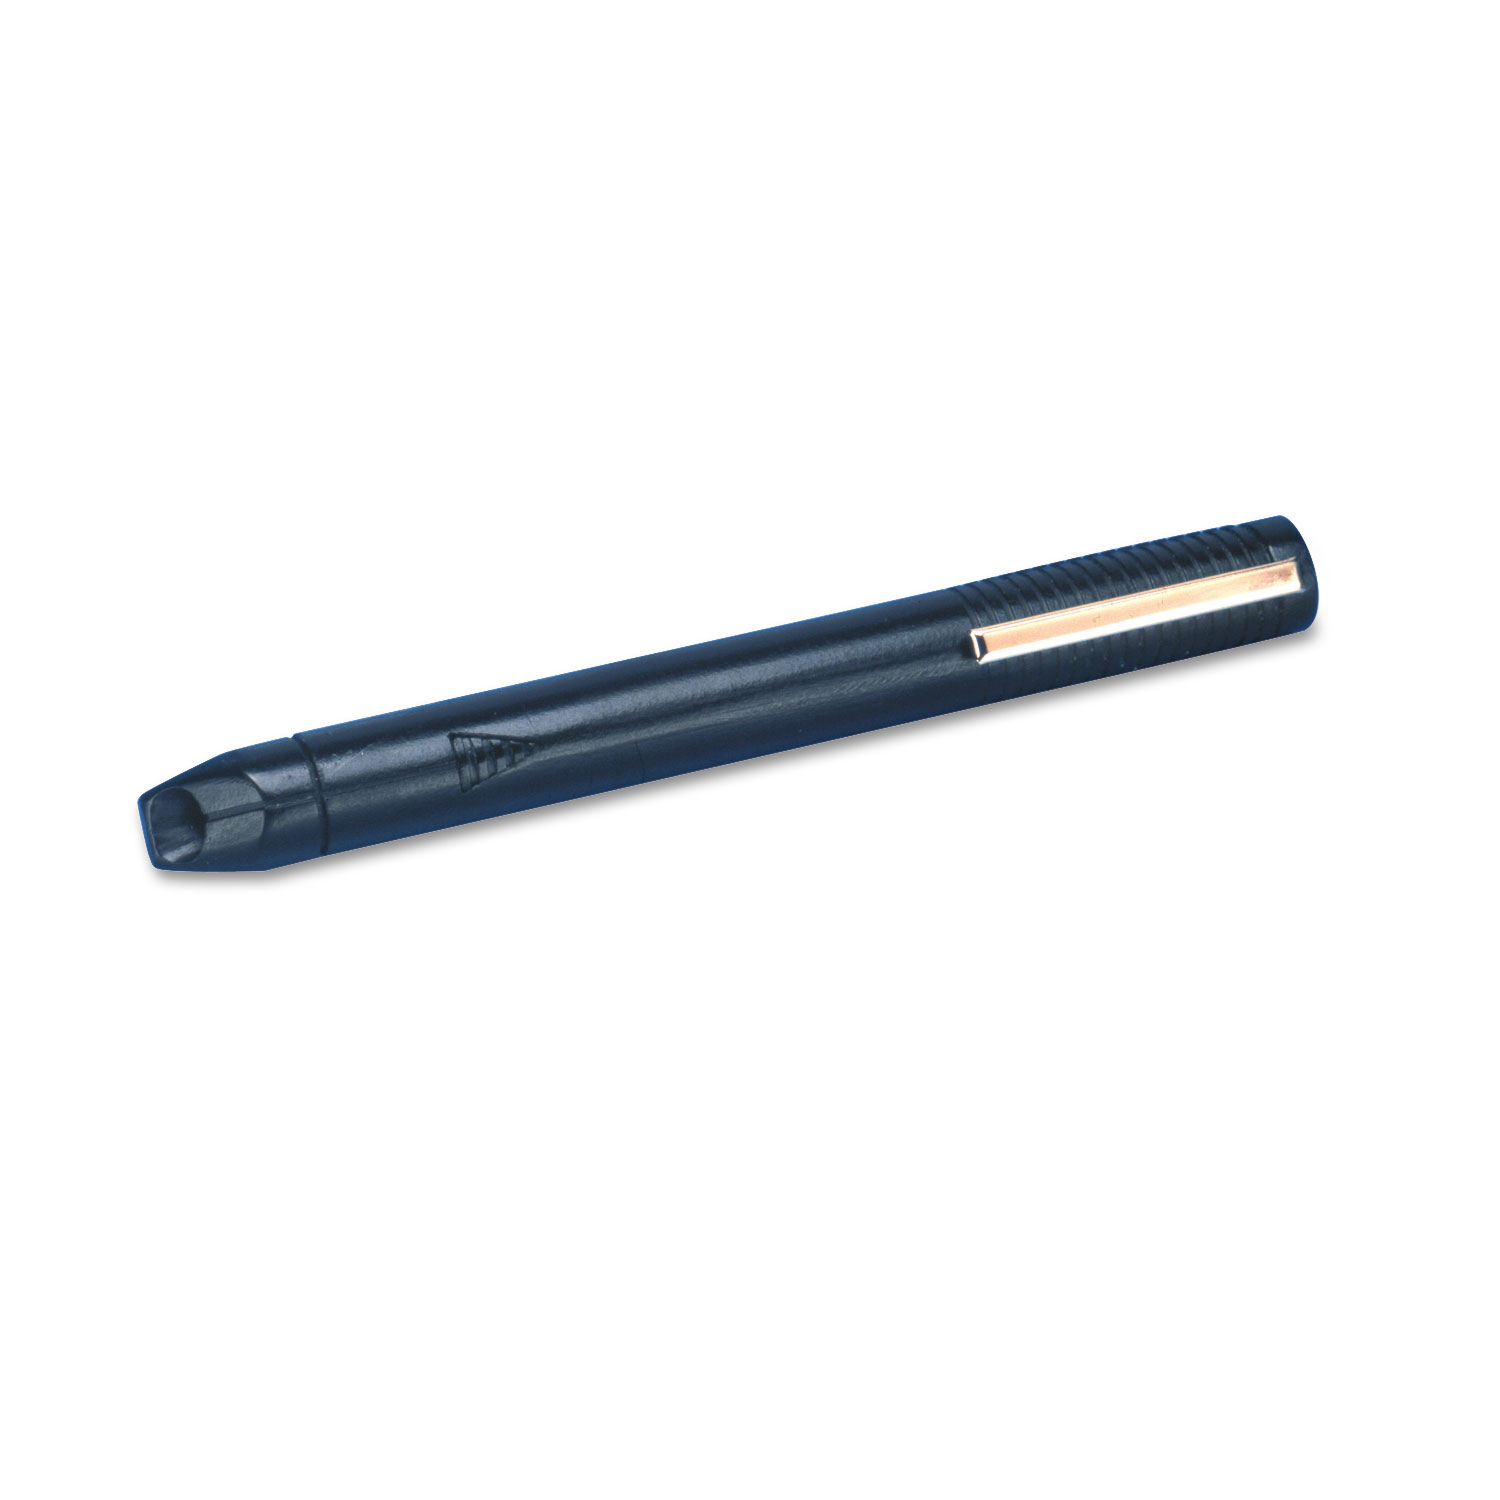 General Purpose Plastic Laser Pointer, Class 3A, Projects 1148 ft, Black